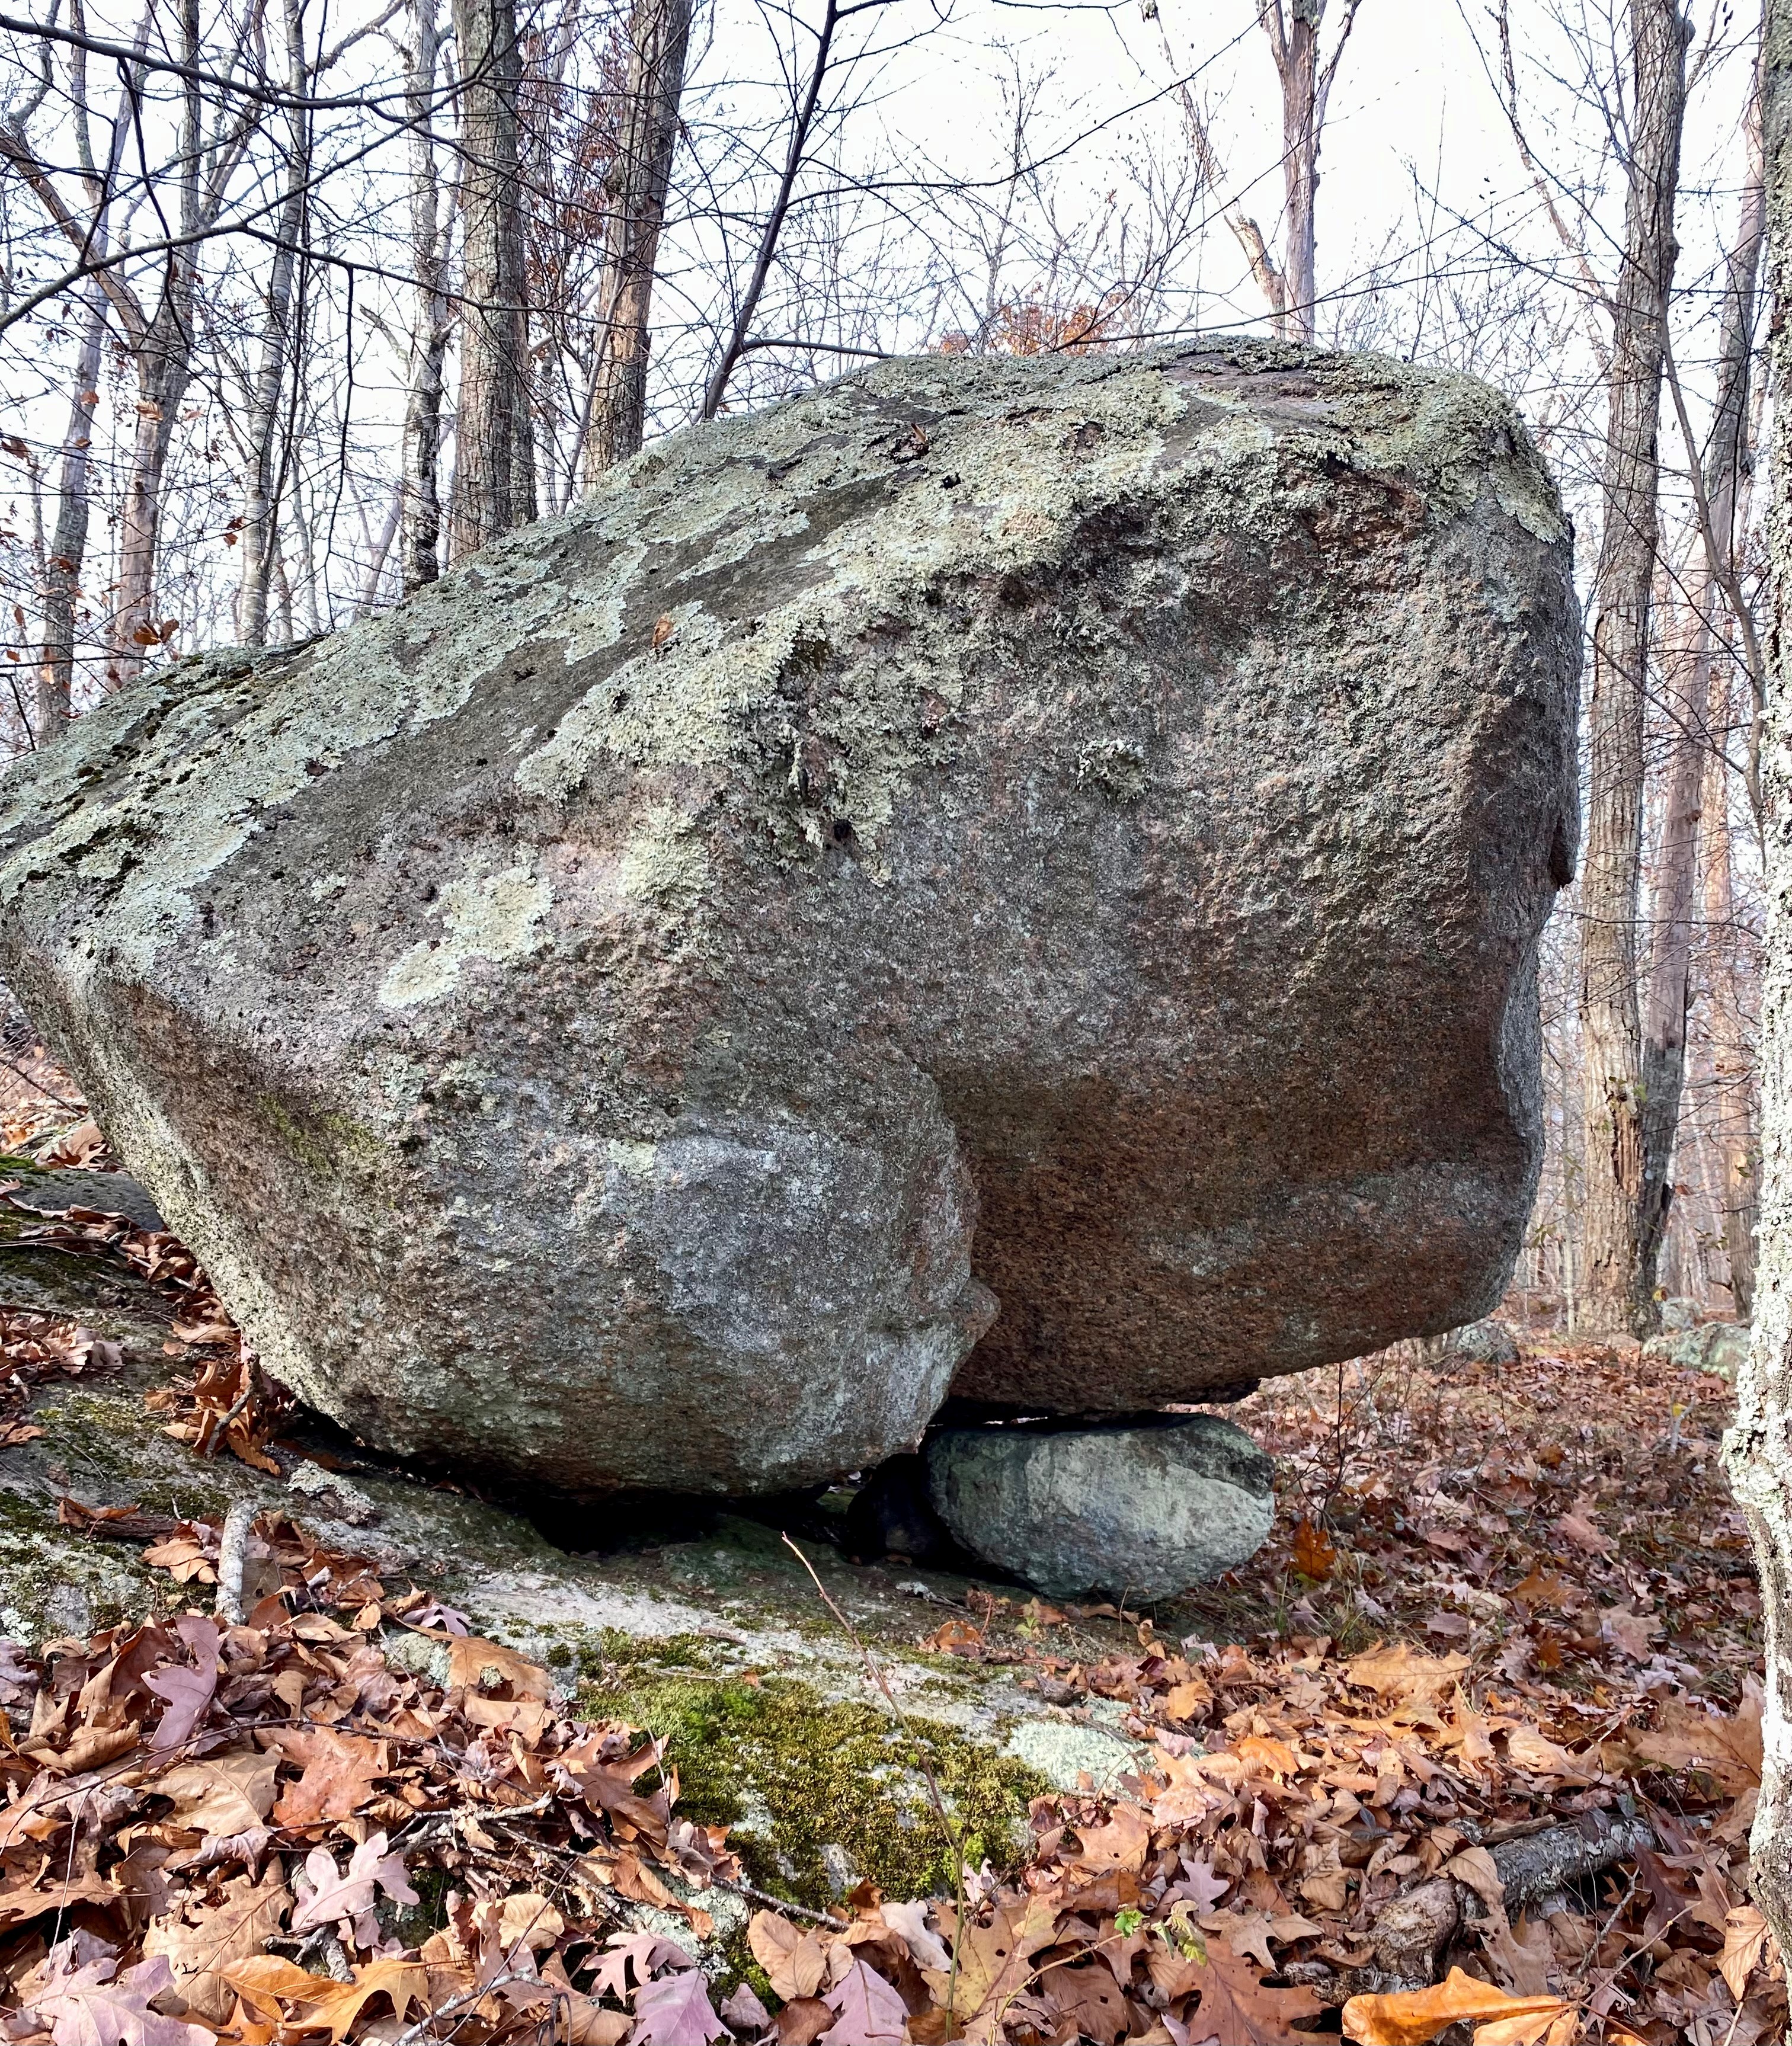 A large gray boulder covered with green lichen, resting on a much smaller stone, tucked underneath at right.